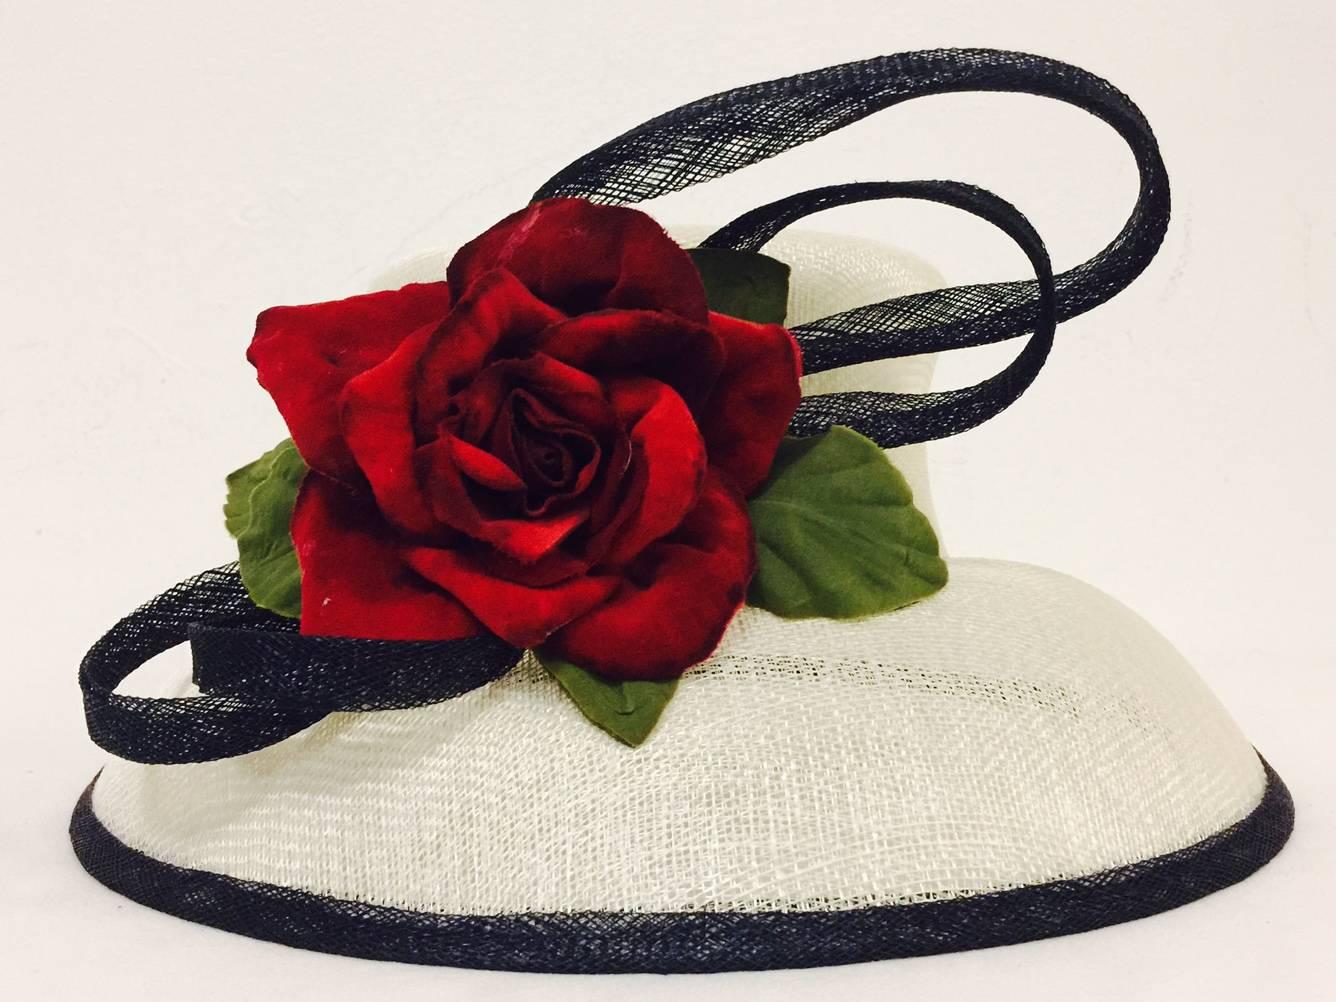 Normally reserved for expensive, bespoke millinery, parasisal is made using two over two weave and is delicate, but resilient!  For Herald & Heart, typical 